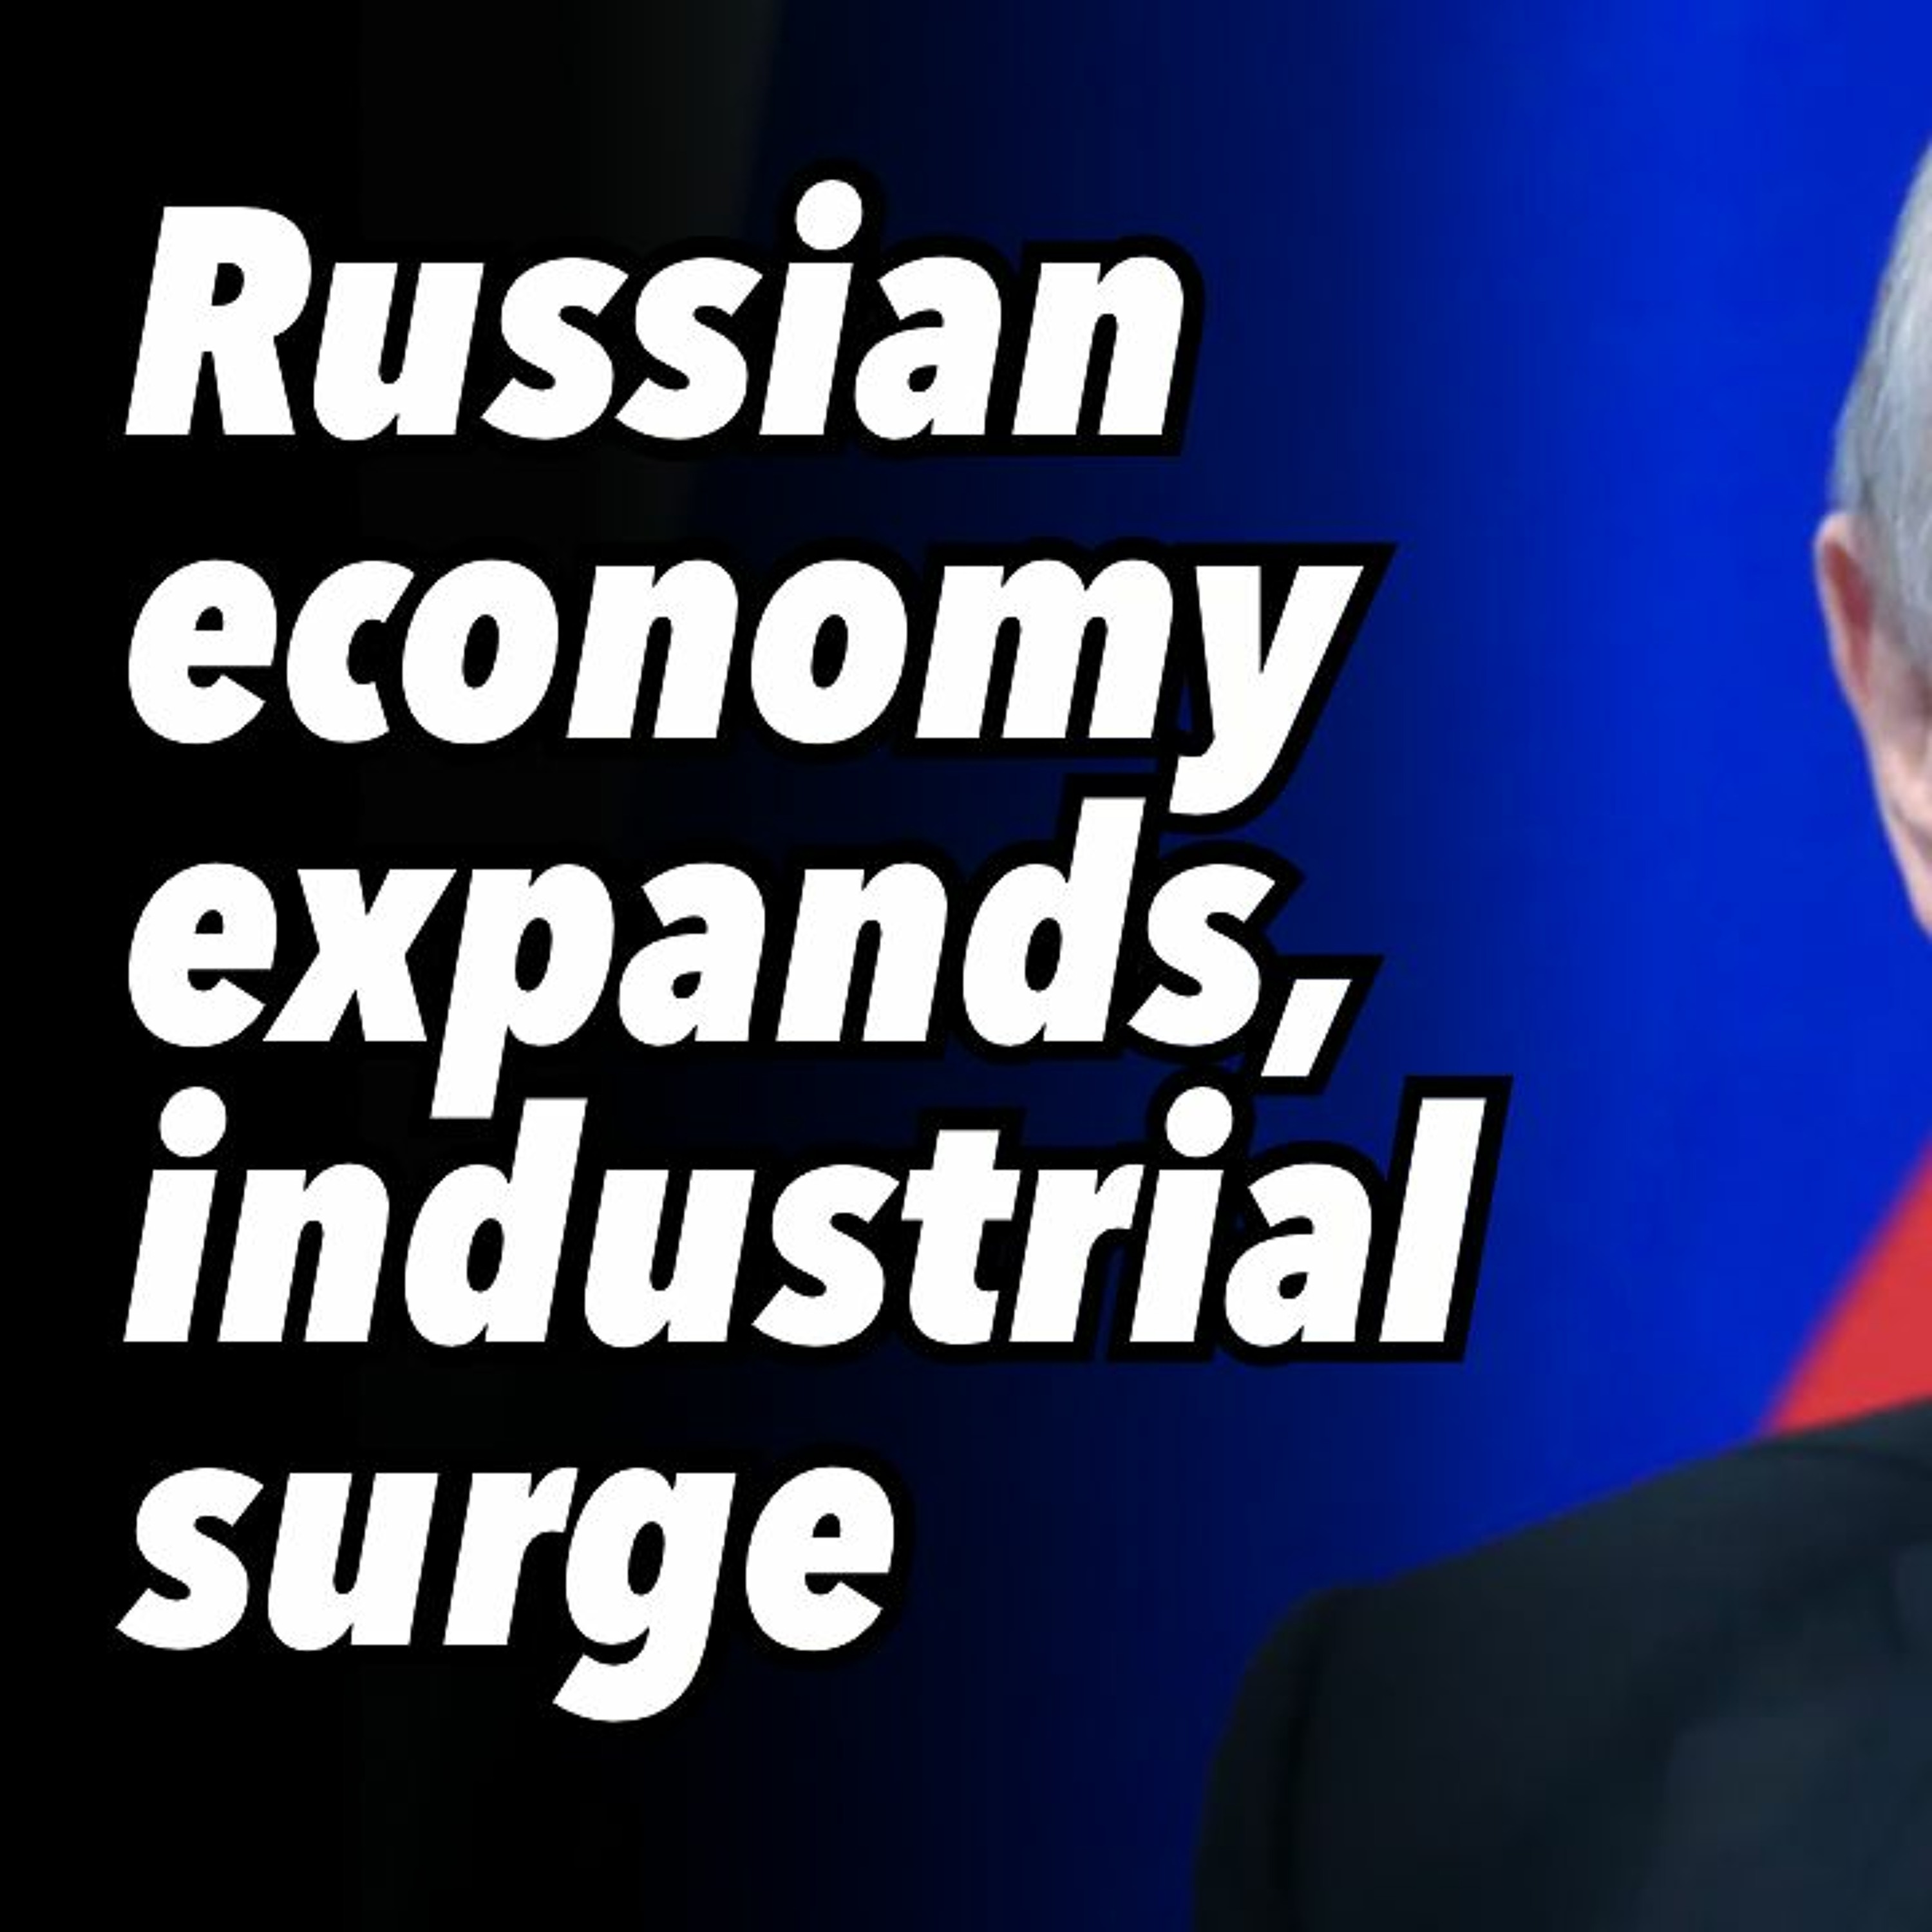 Russian economy expands, industrial surge